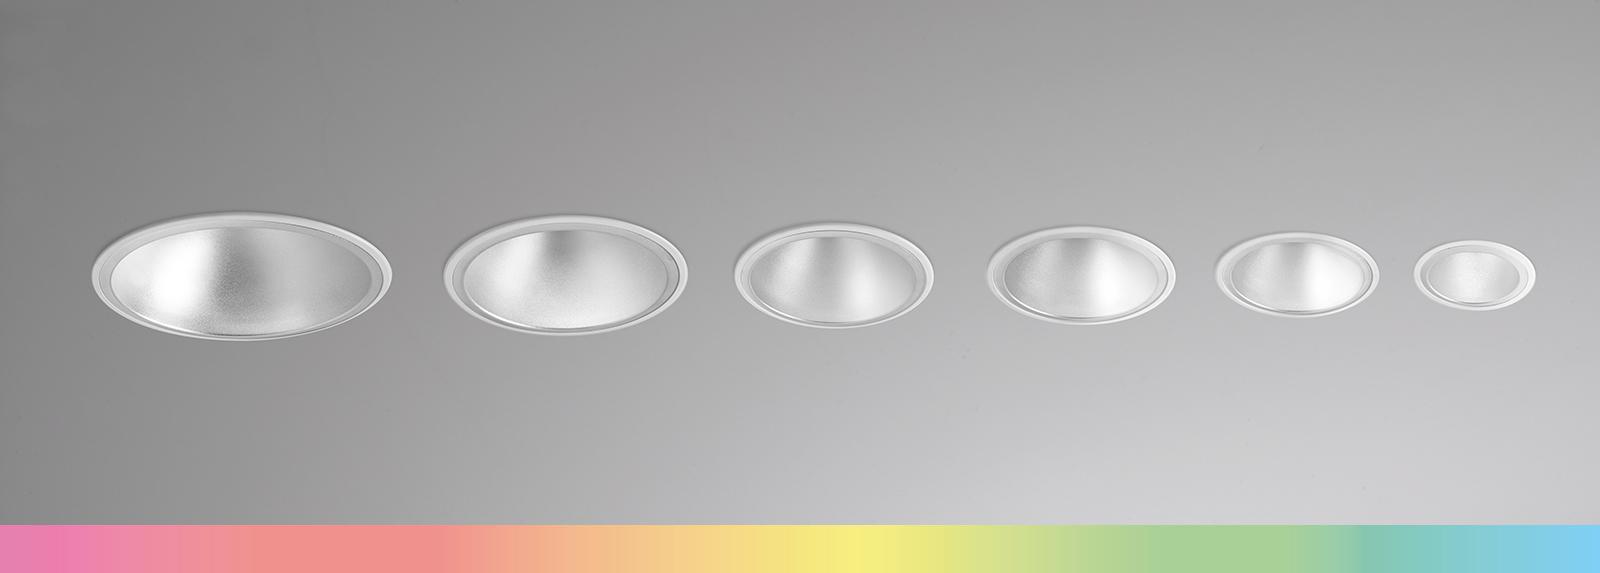 CELL OPTIMAL DISPLAY  | Downlights empotrables